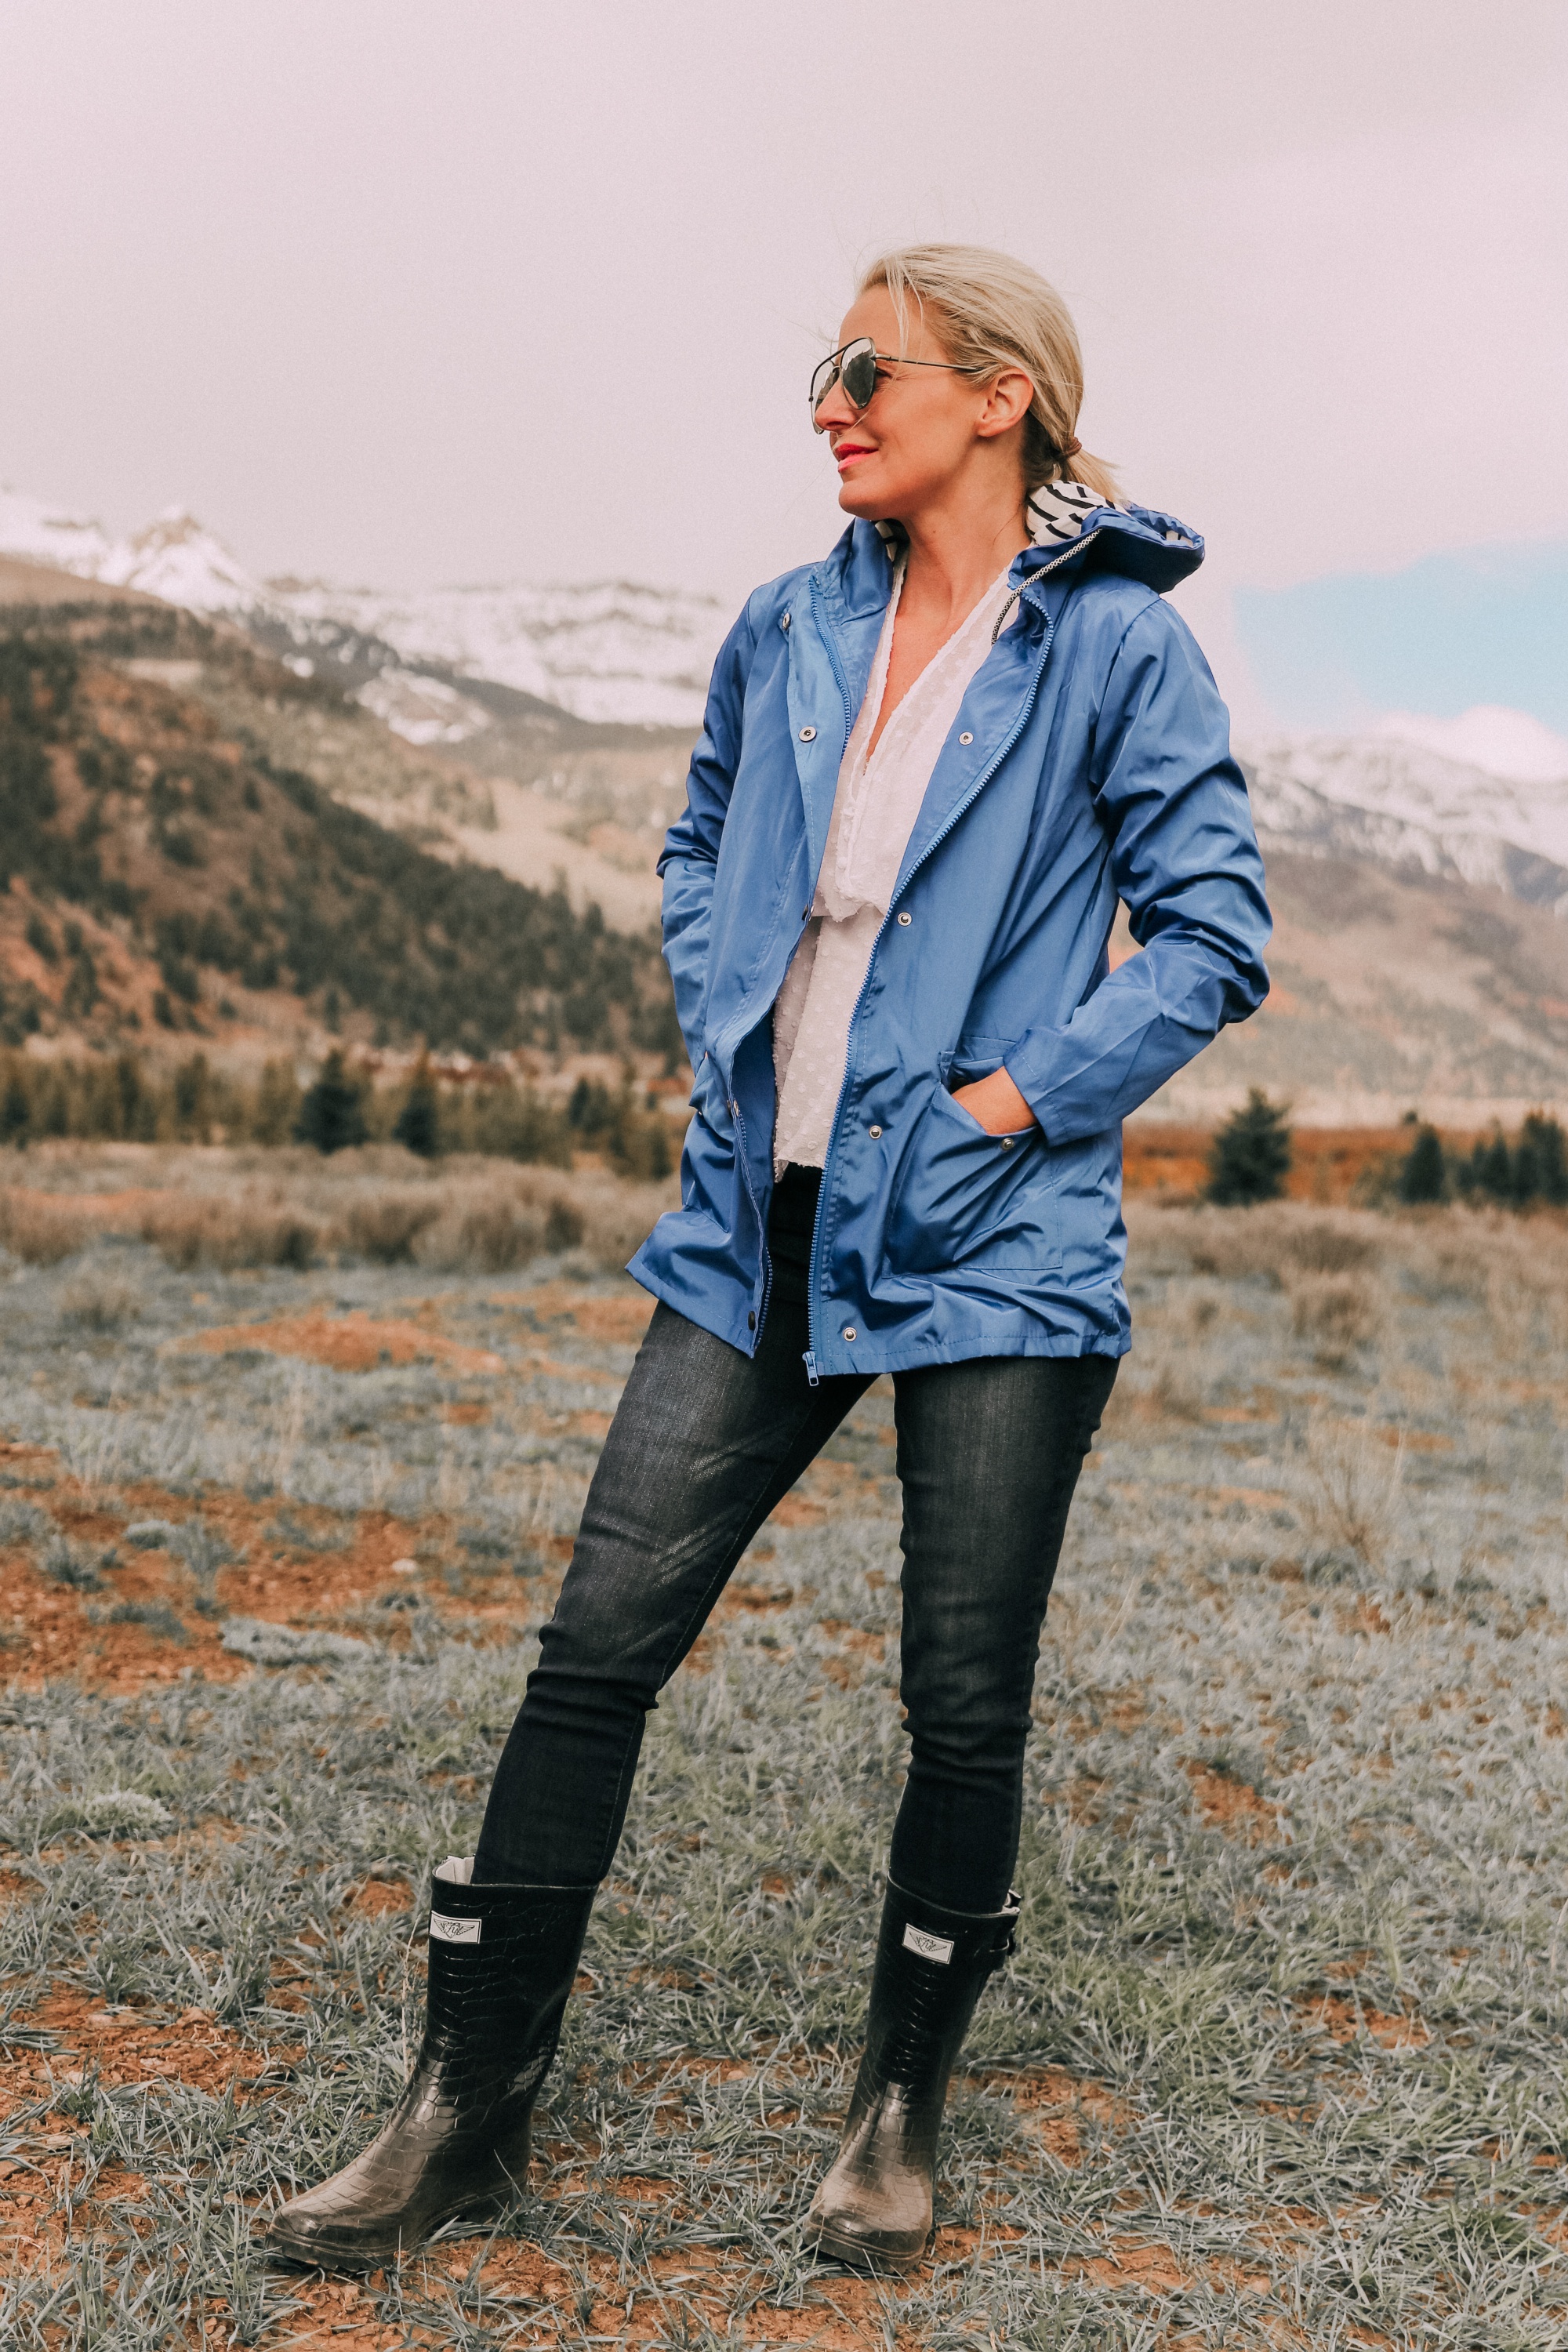 fashion blogger erin busbee in telluride colorado wearing affordable blue waterproof lightweight hooded raincoat over white cinched blouse paired with dark wash skinny ankle jeans styled with croc patterned rubber rain boots